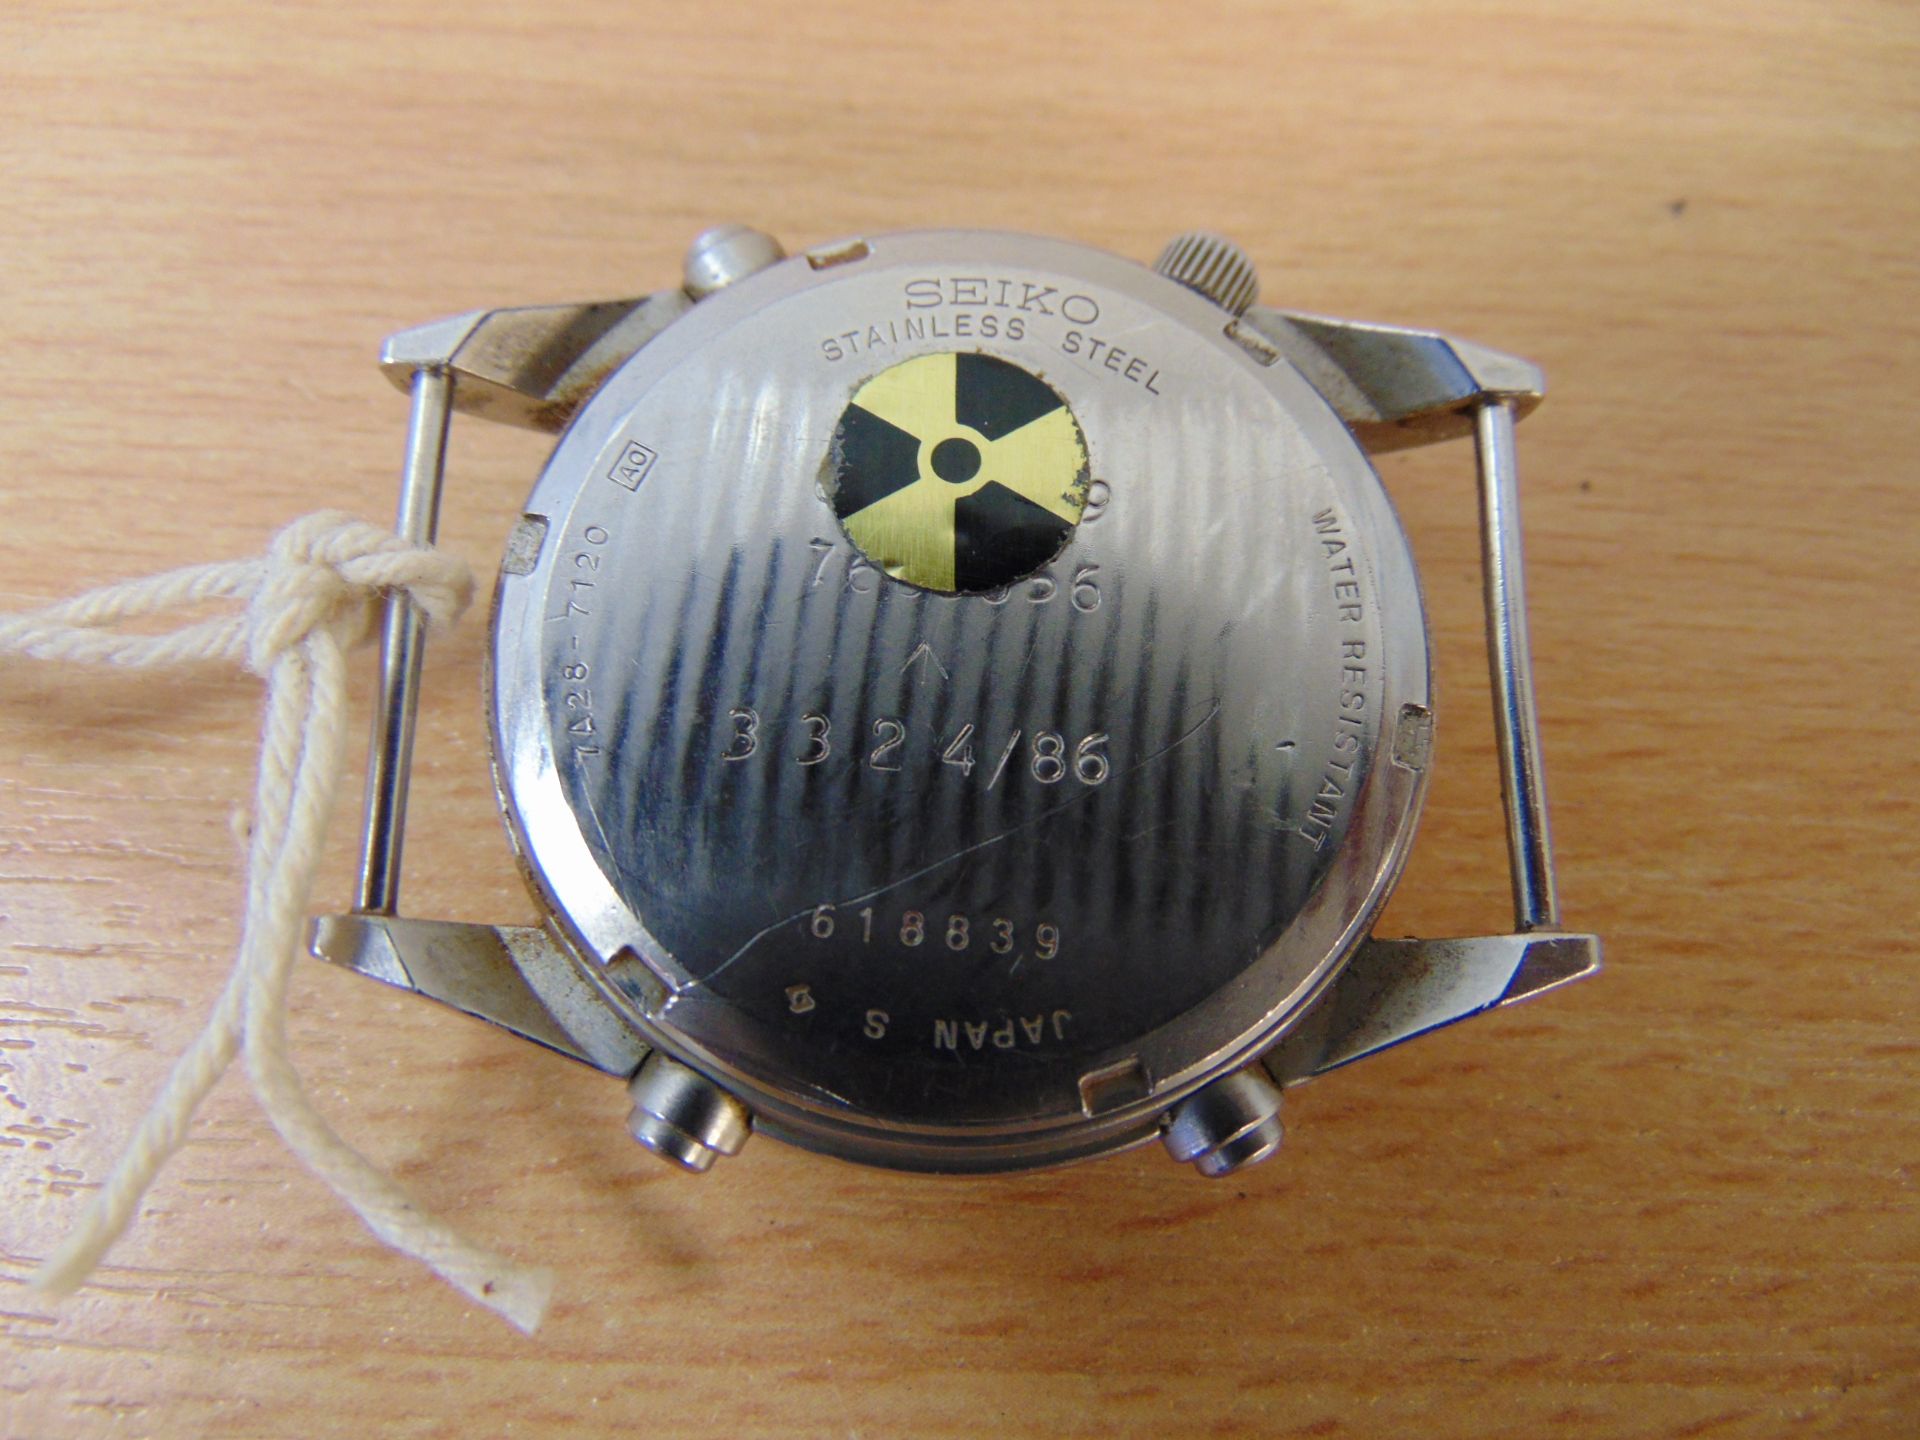 Seiko Gen 1 RAF Pilots Chrono Harrier Force Issue Nato Marks, Dated 1986 - Image 2 of 3